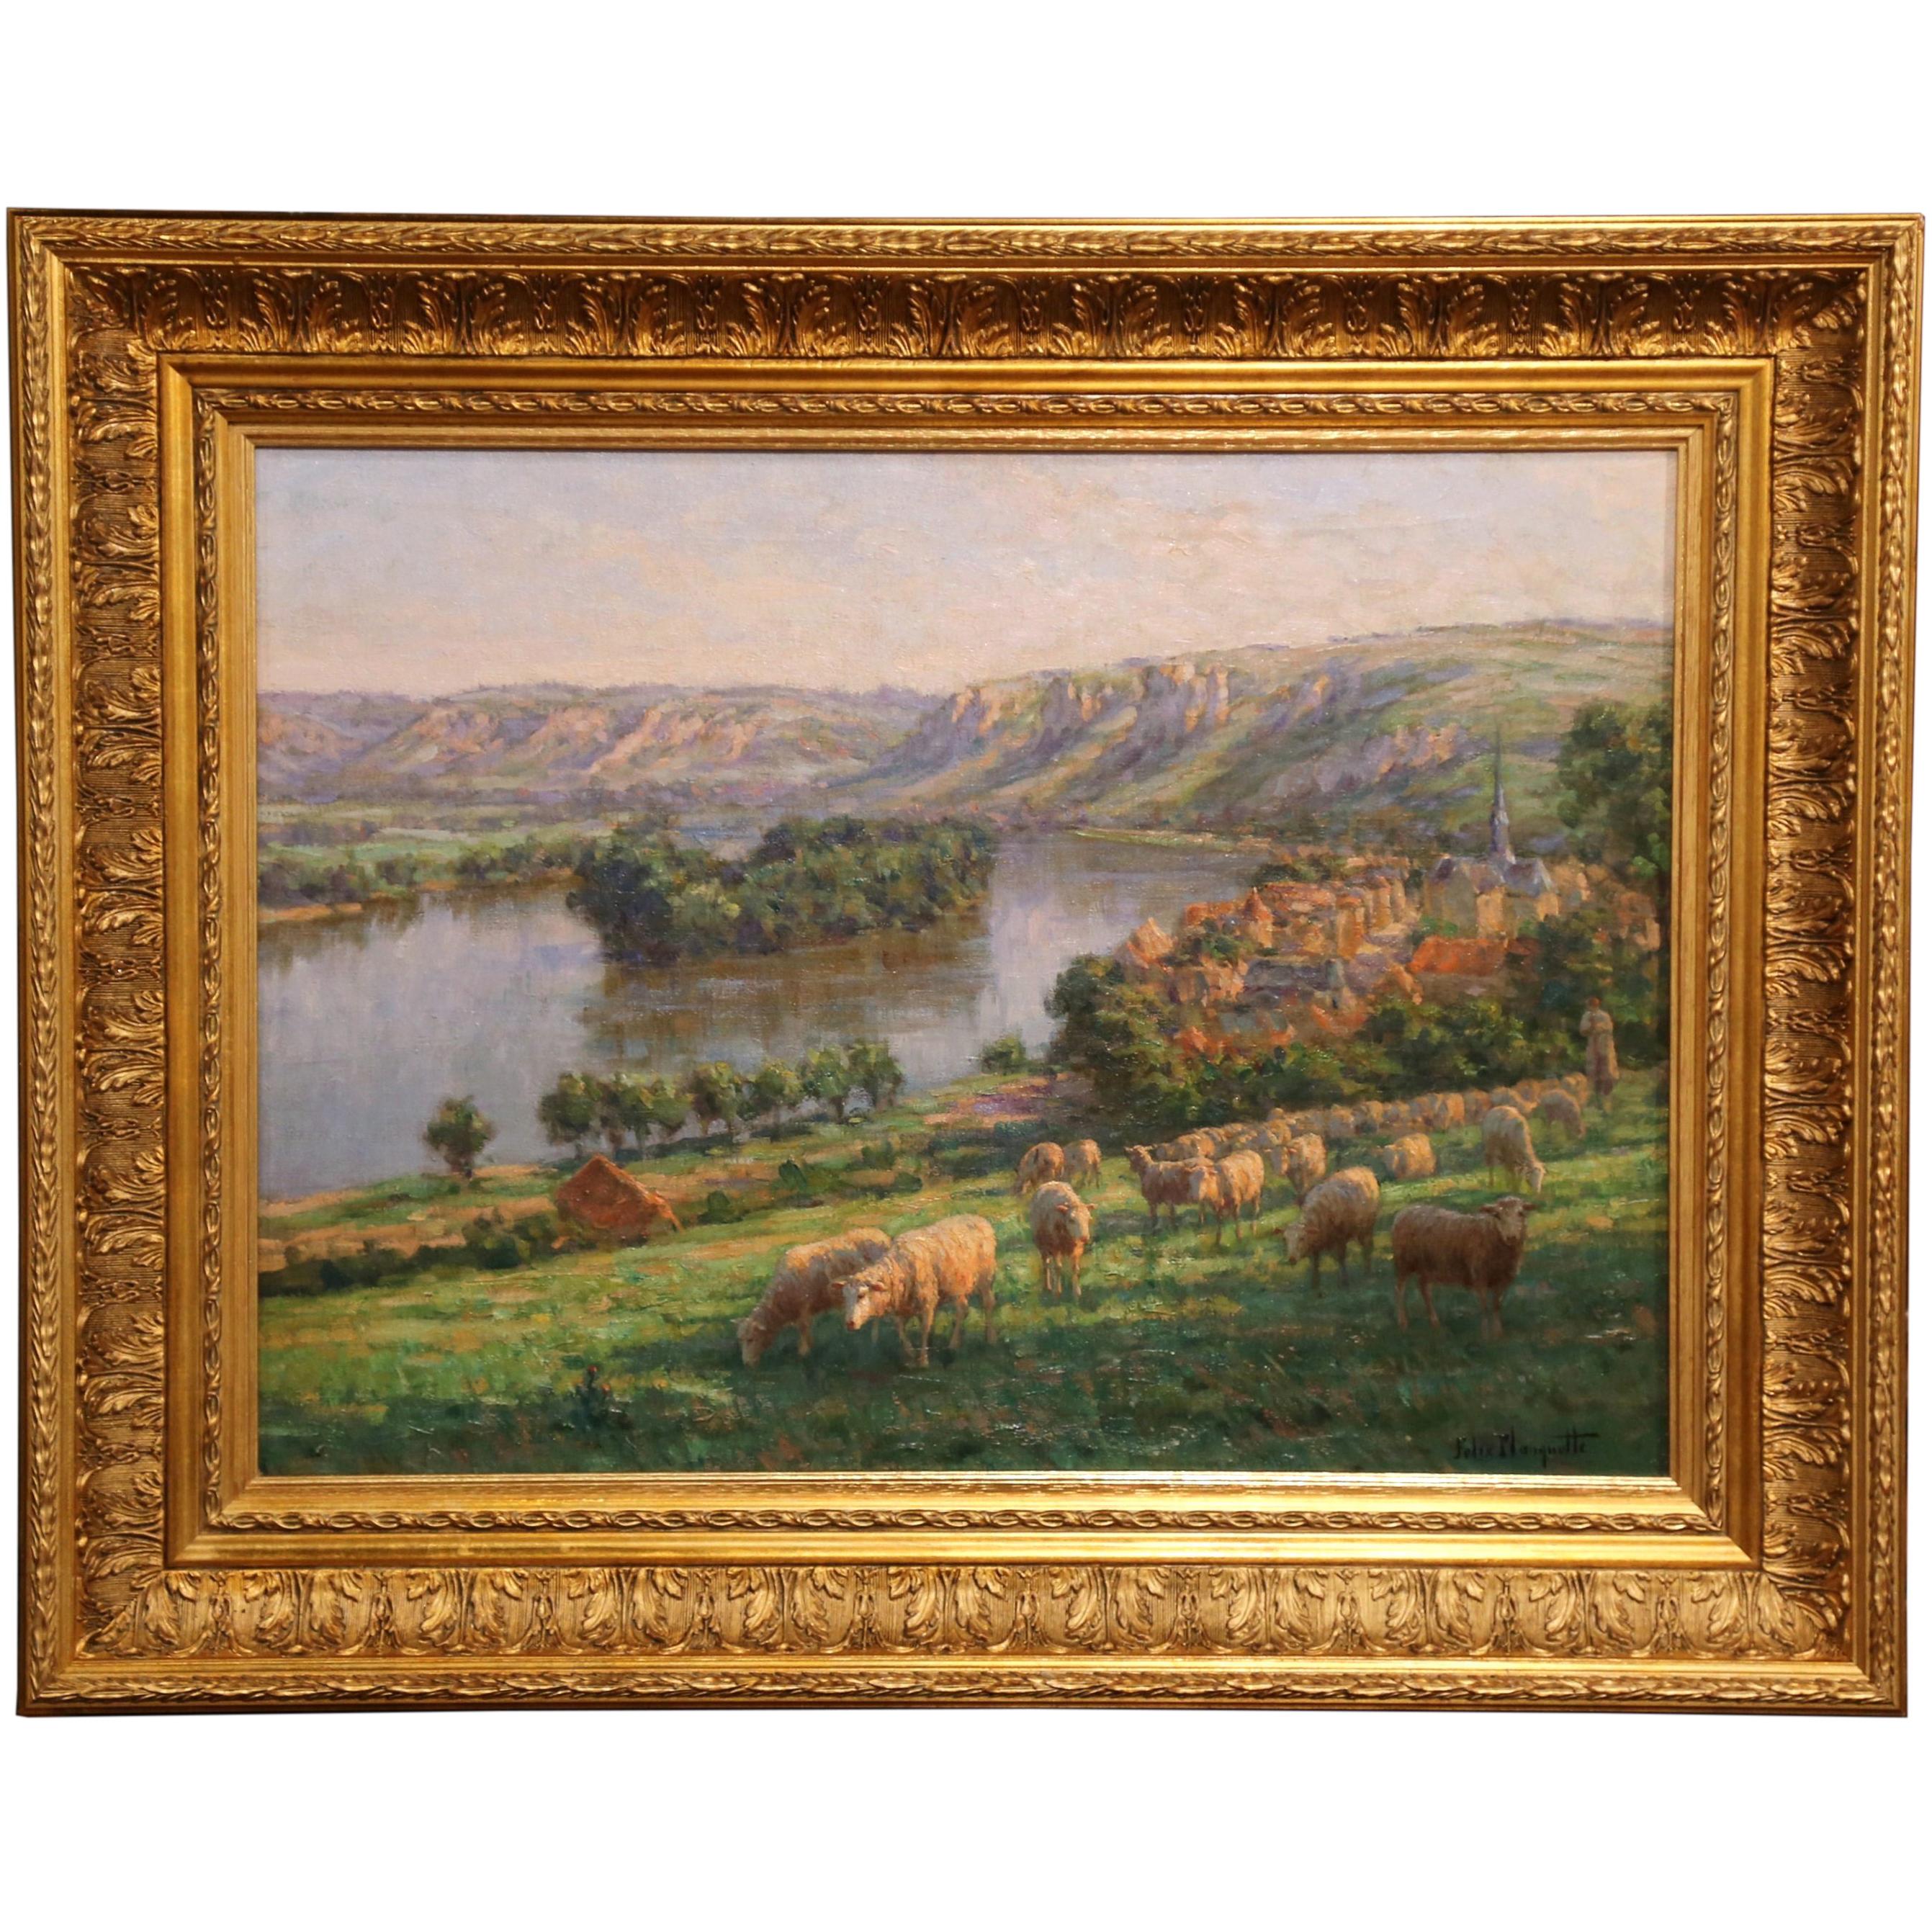 Add a beautiful view to your walls with this picturesque oil on canvas. The painting depicts a peaceful pastoral scene featuring a herd of sheep grazing in the foreground, and a rolling, countryside landscape in the background dotted with a village,